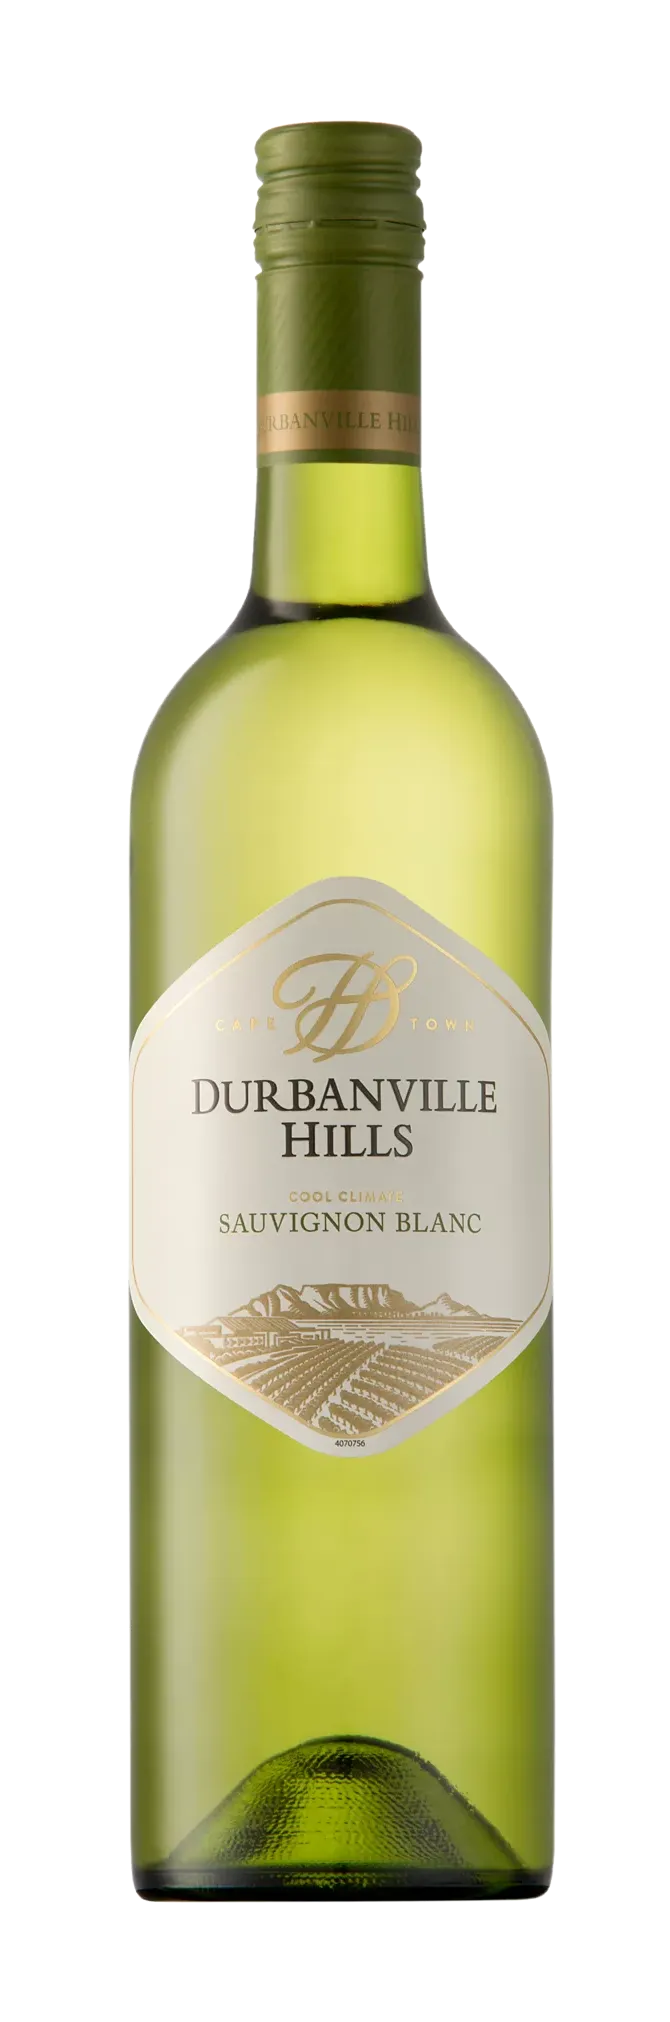 Bottle of Durbanville Hills Sauvignon Blanc from search results